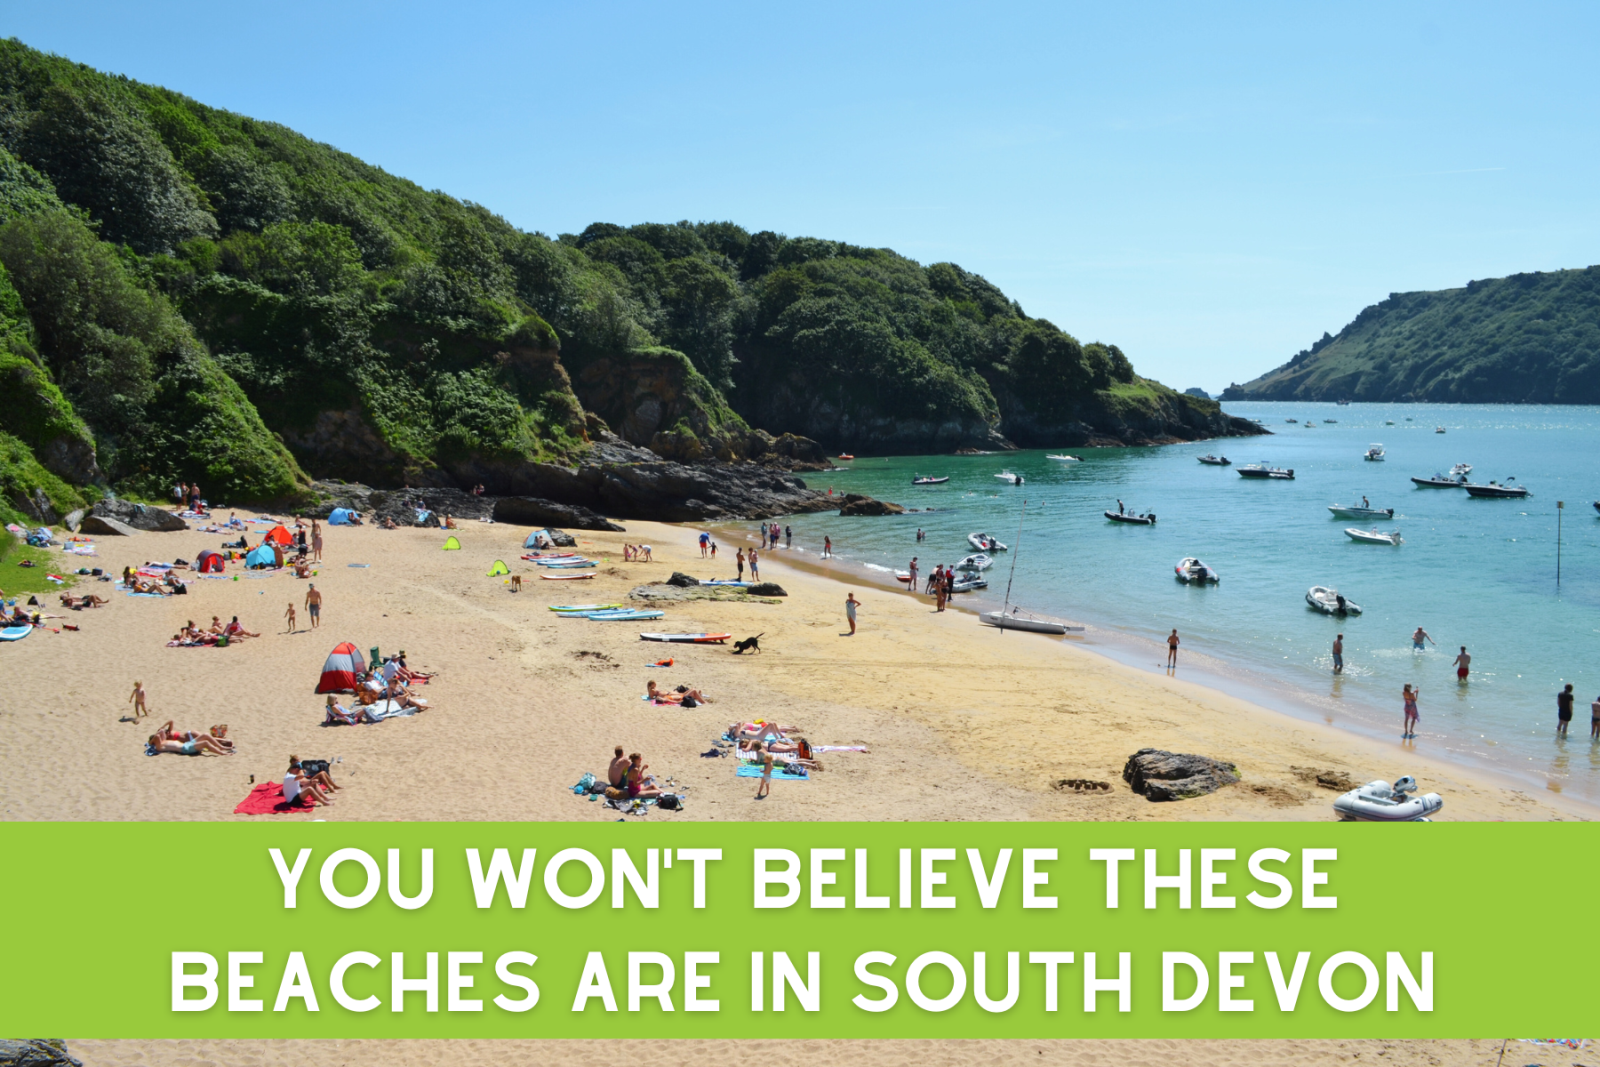 You won't believe these beaches are in South Devon